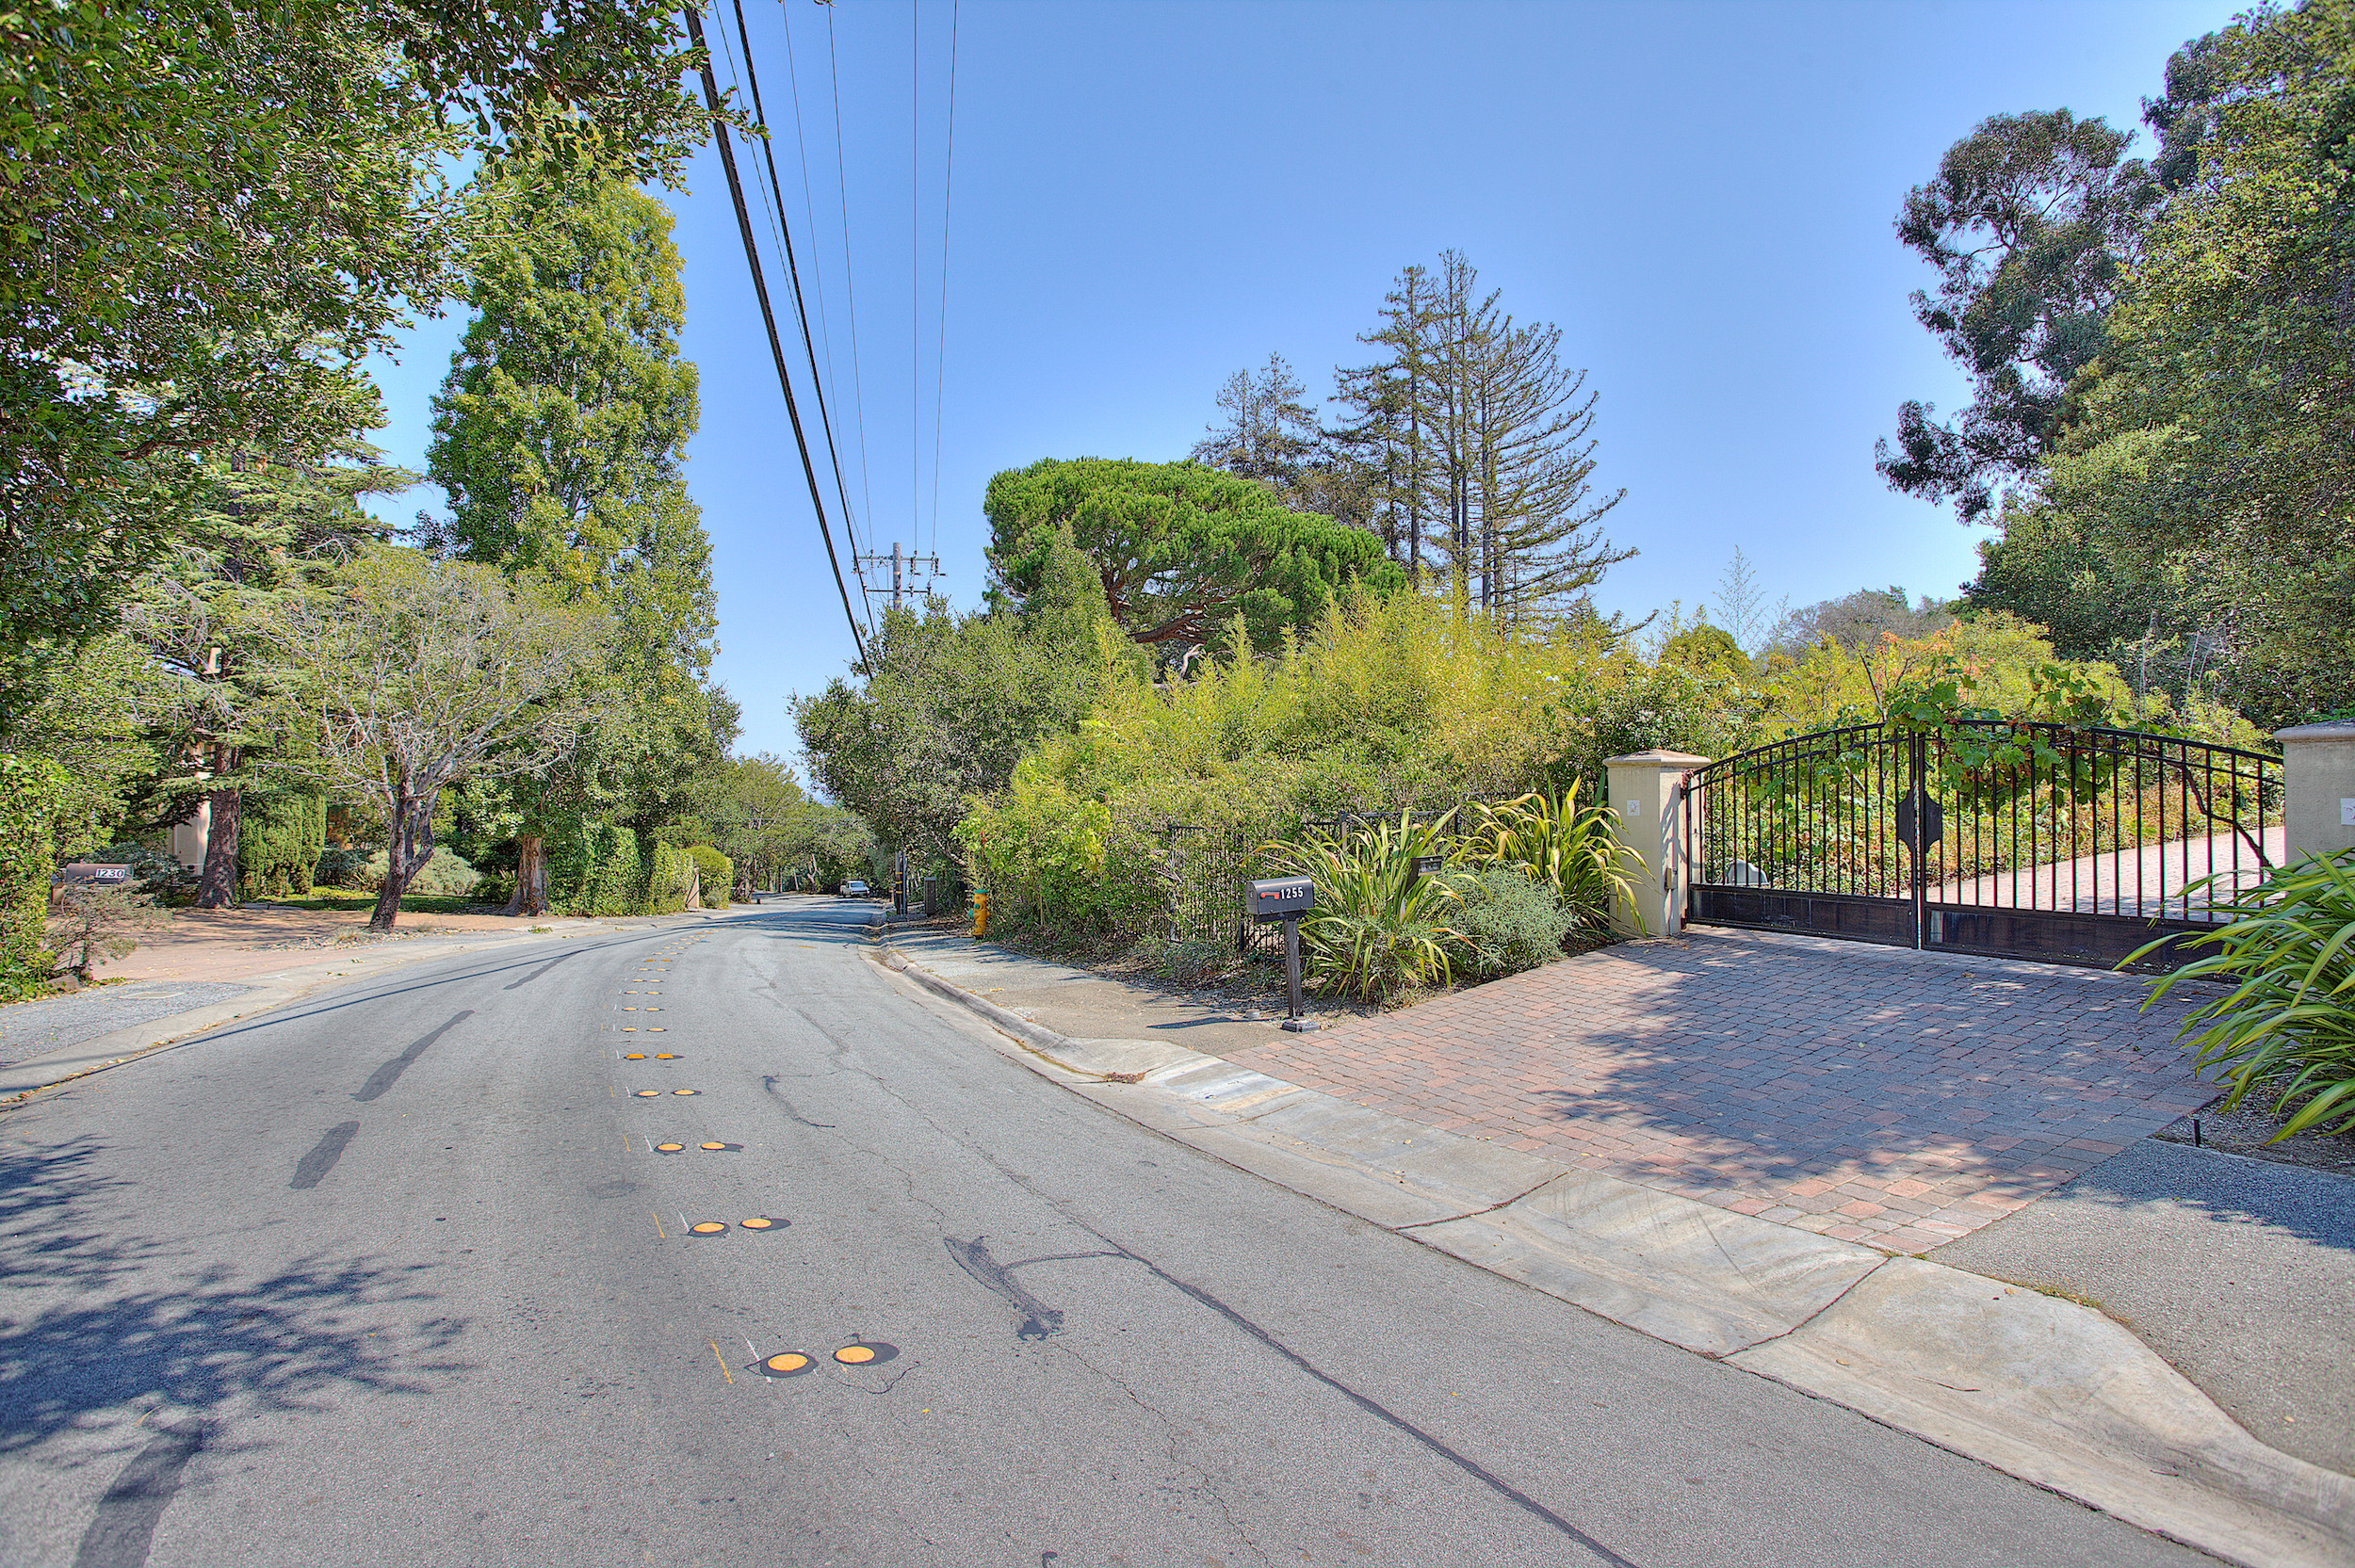 Gated home and tree-lined street in Hillsborough Knolls